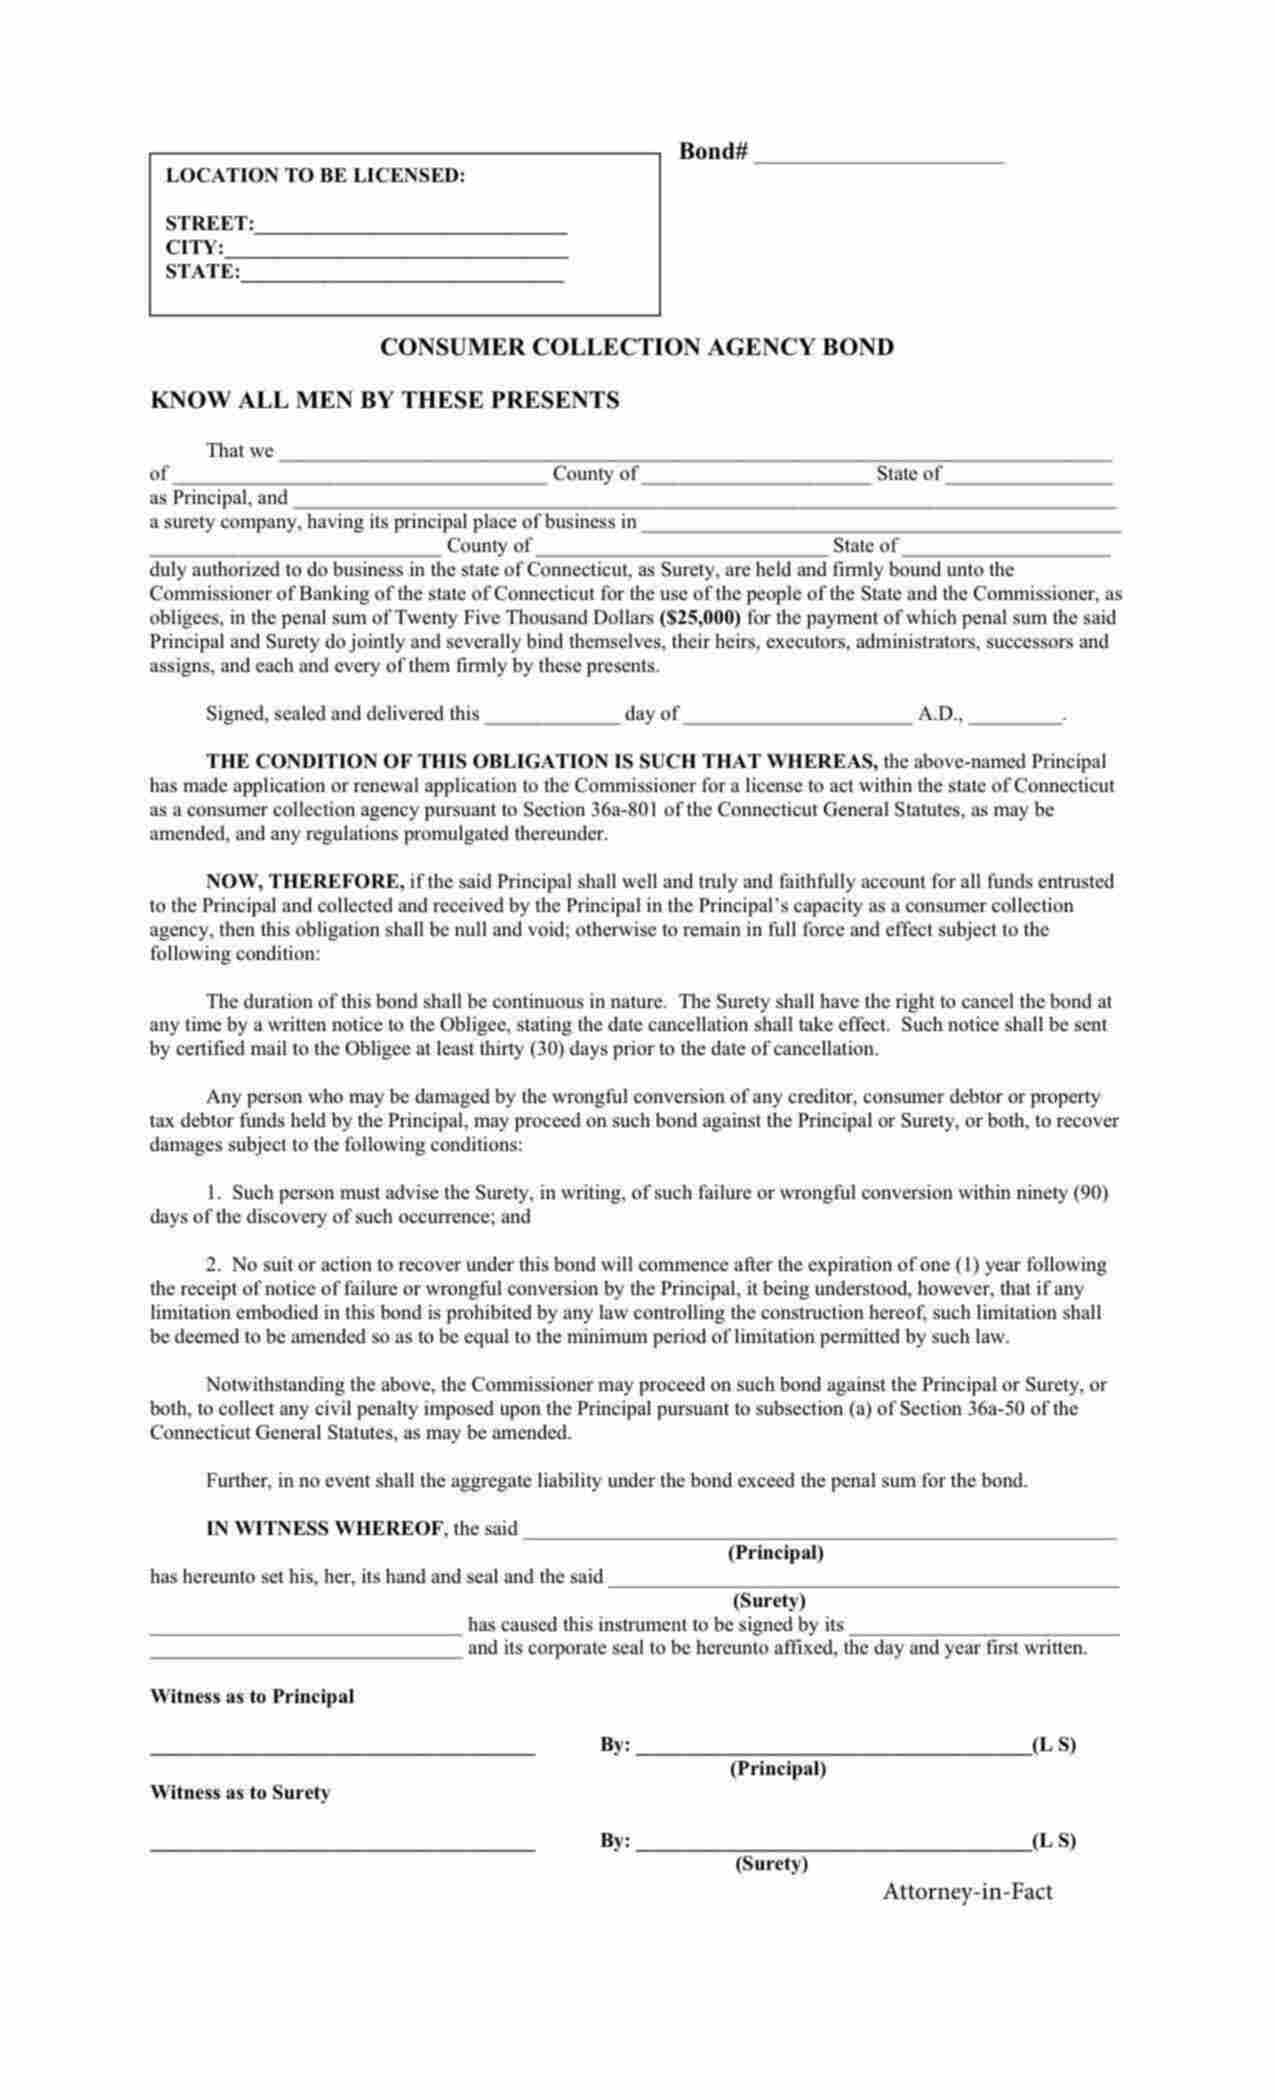 Connecticut Consumer Collection Agency Bond Form